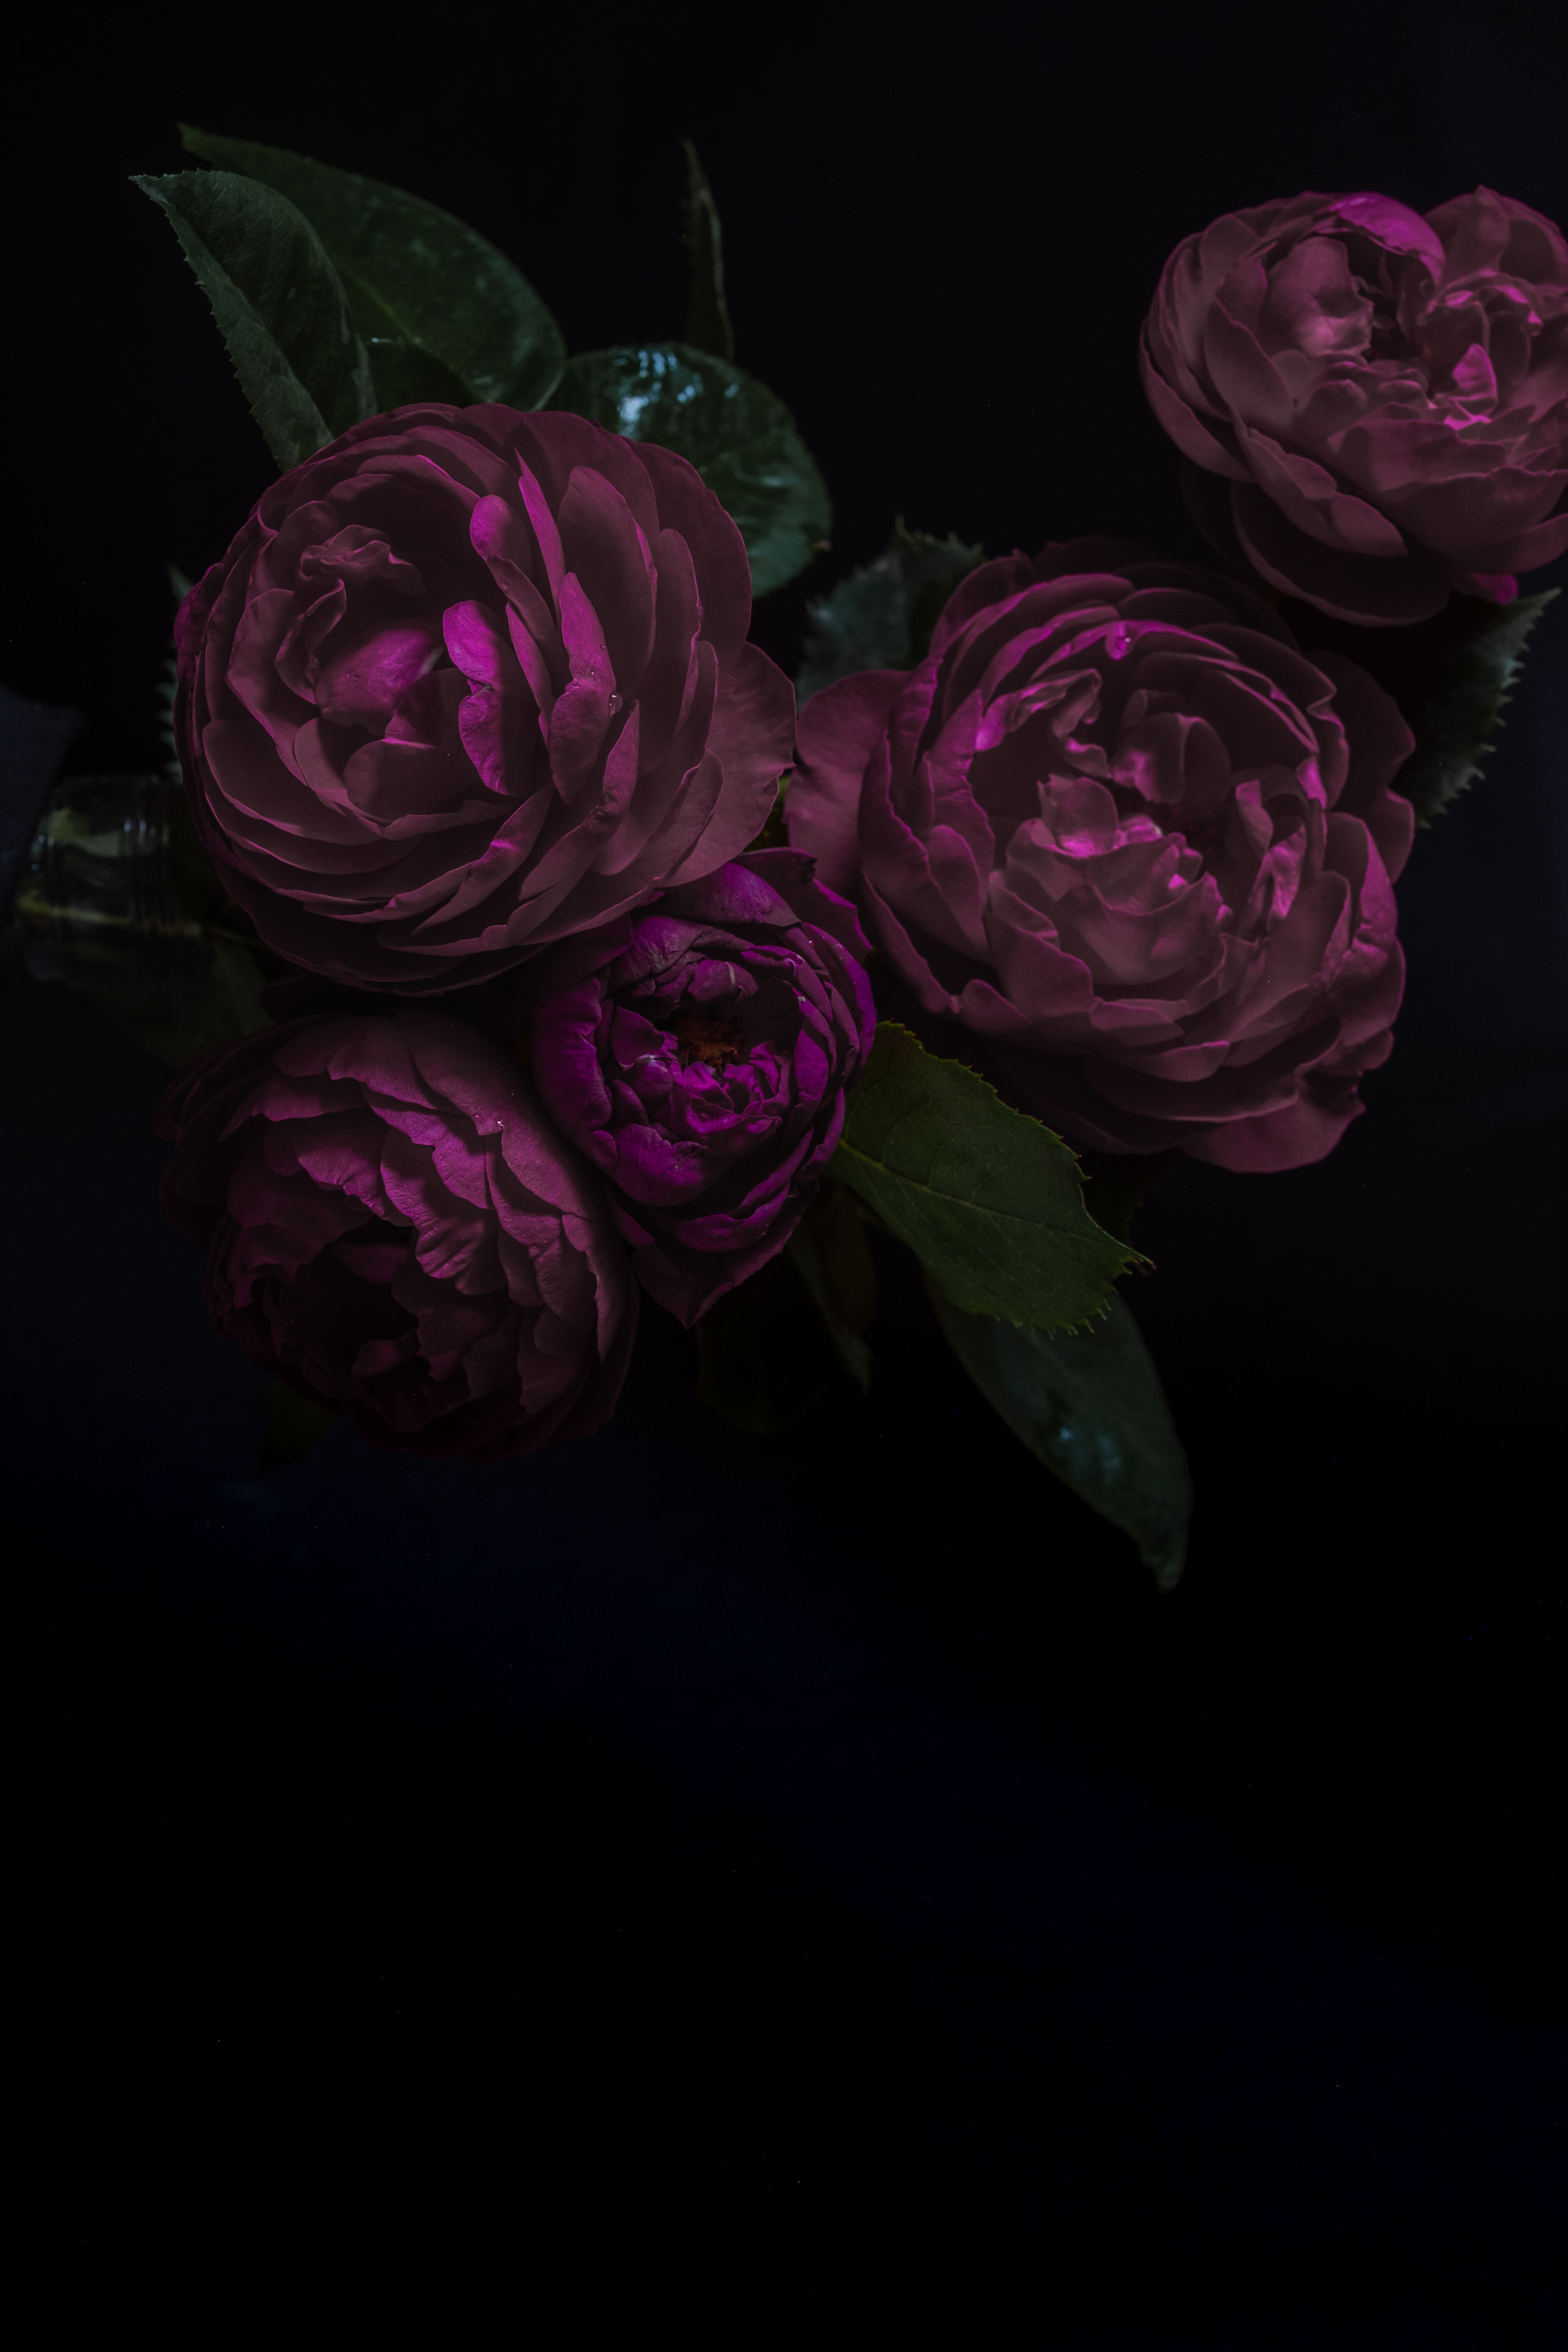 Moody Flowers. Roses Peony Purple on a Black Background. Blur and Selective Focus. Low Key Photo.  Flower Close-up